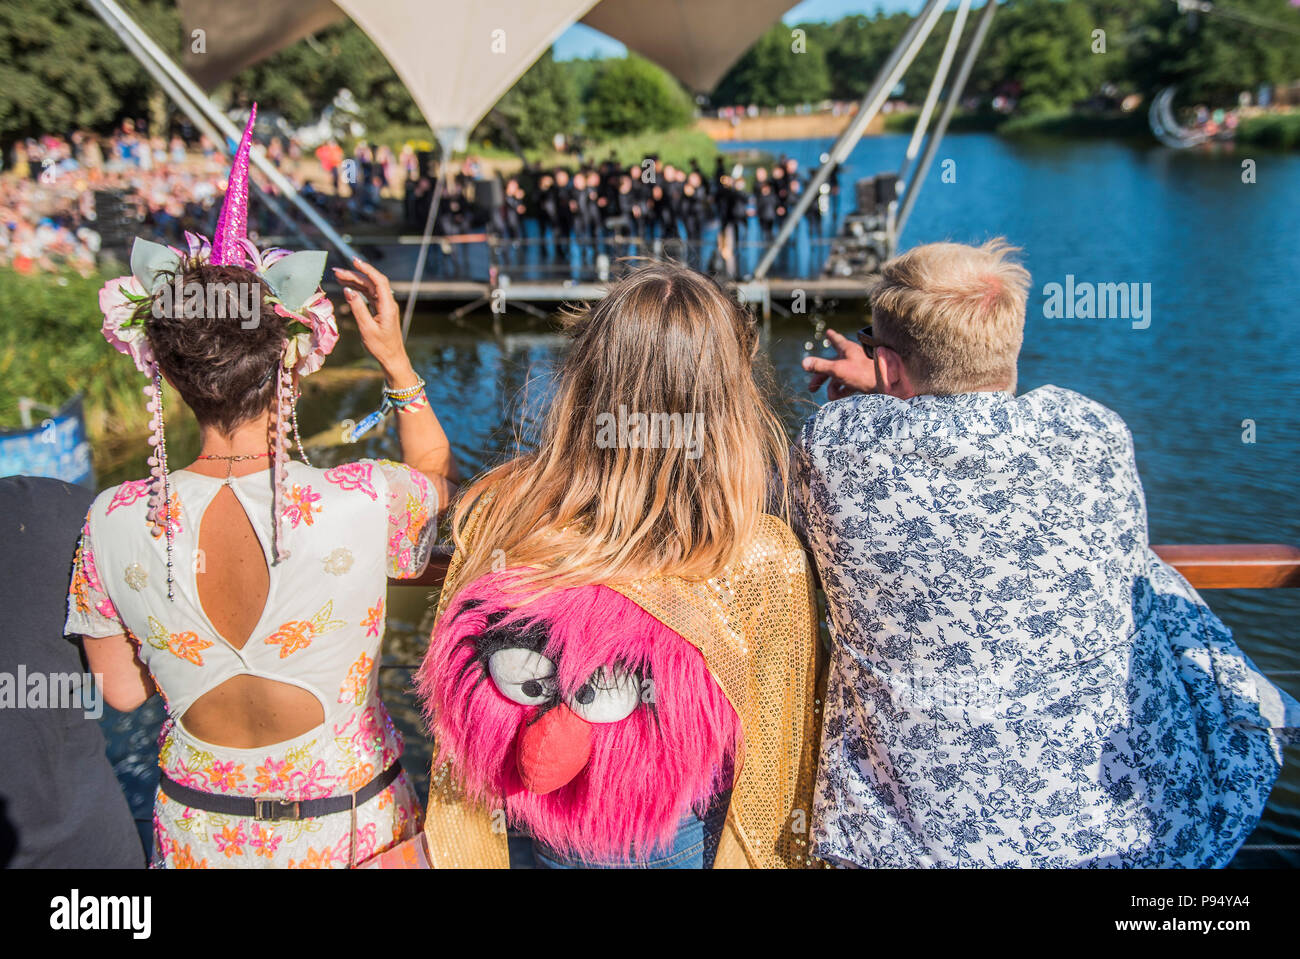 Suffolk, UK, 14 July 2018. Sadlers Wells presents Zoonation-Sylvia on the Waterfront Stage - The 2018 Latitude Festival, Henham Park. Suffolk 14 July 2018Credit: Guy Bell/Alamy Live News  Stock Photo